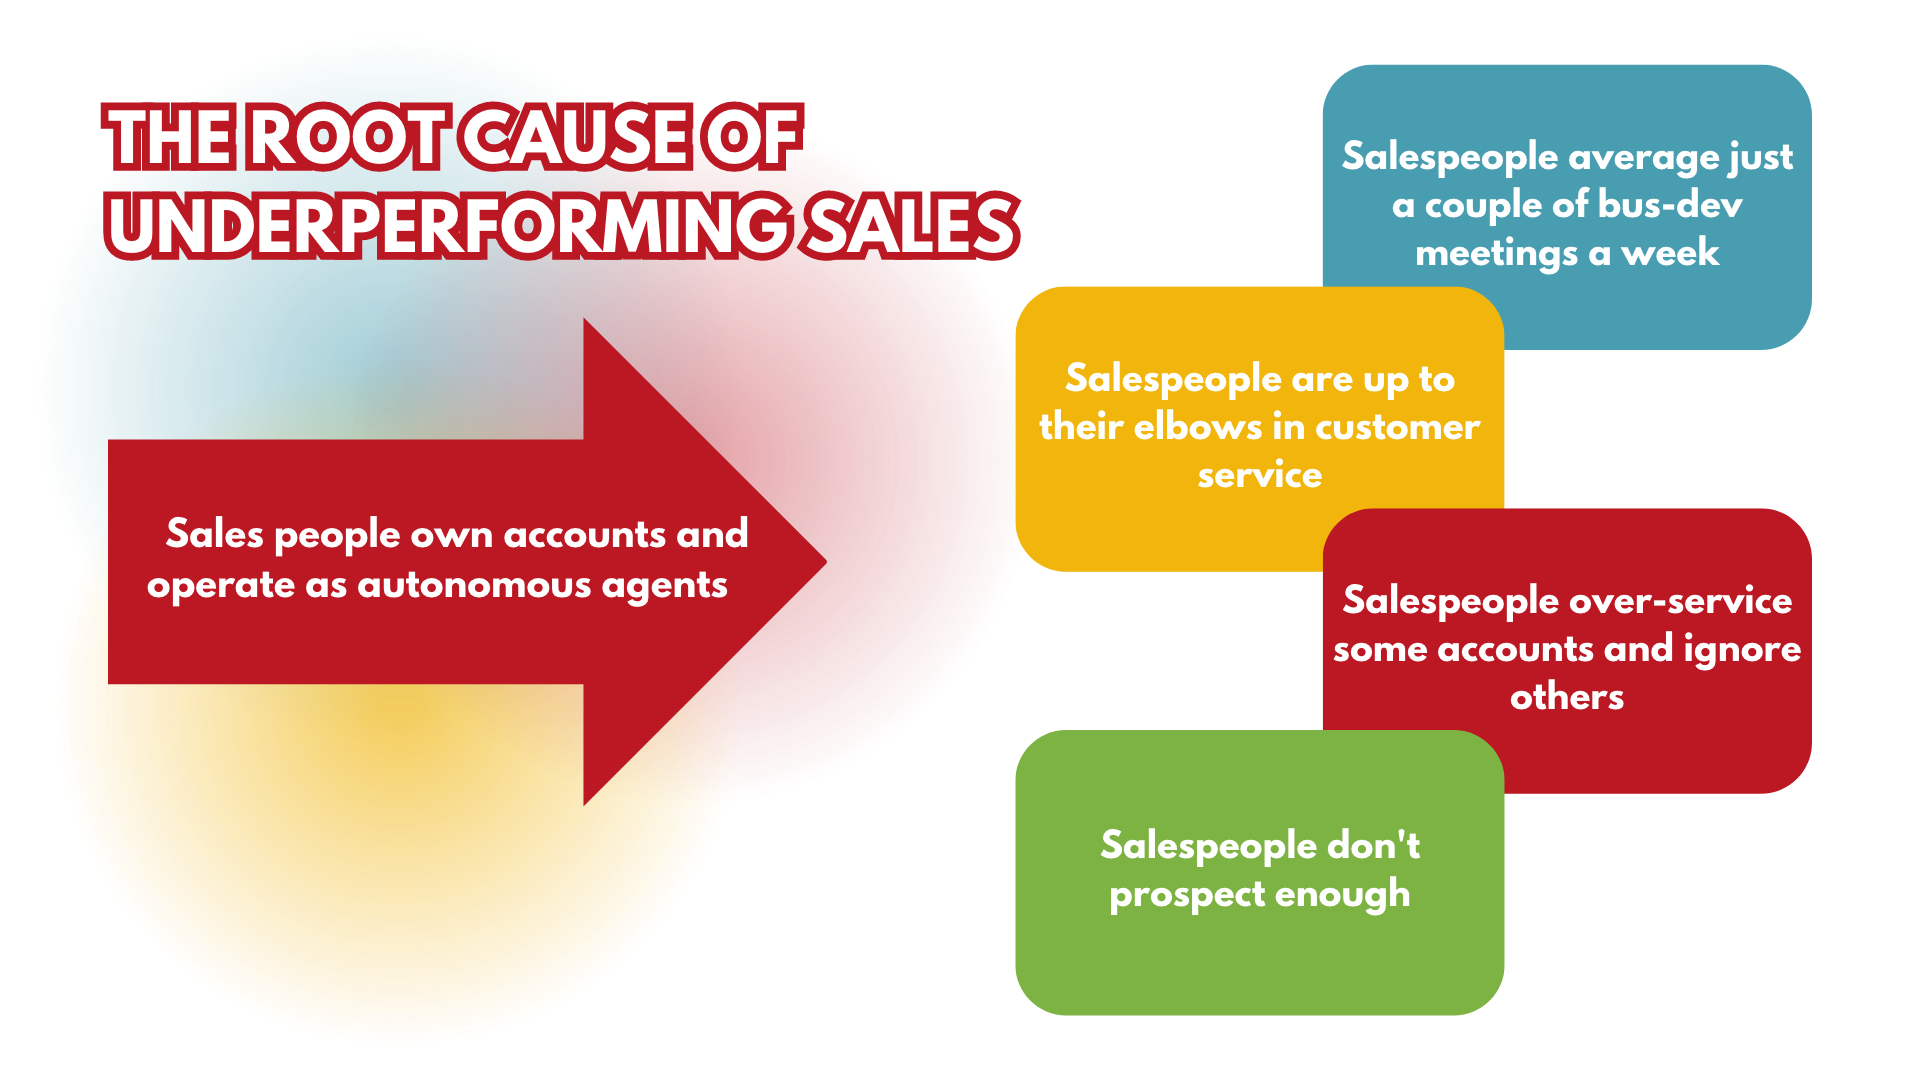 Sales people own accounts and operate as autonomous agents